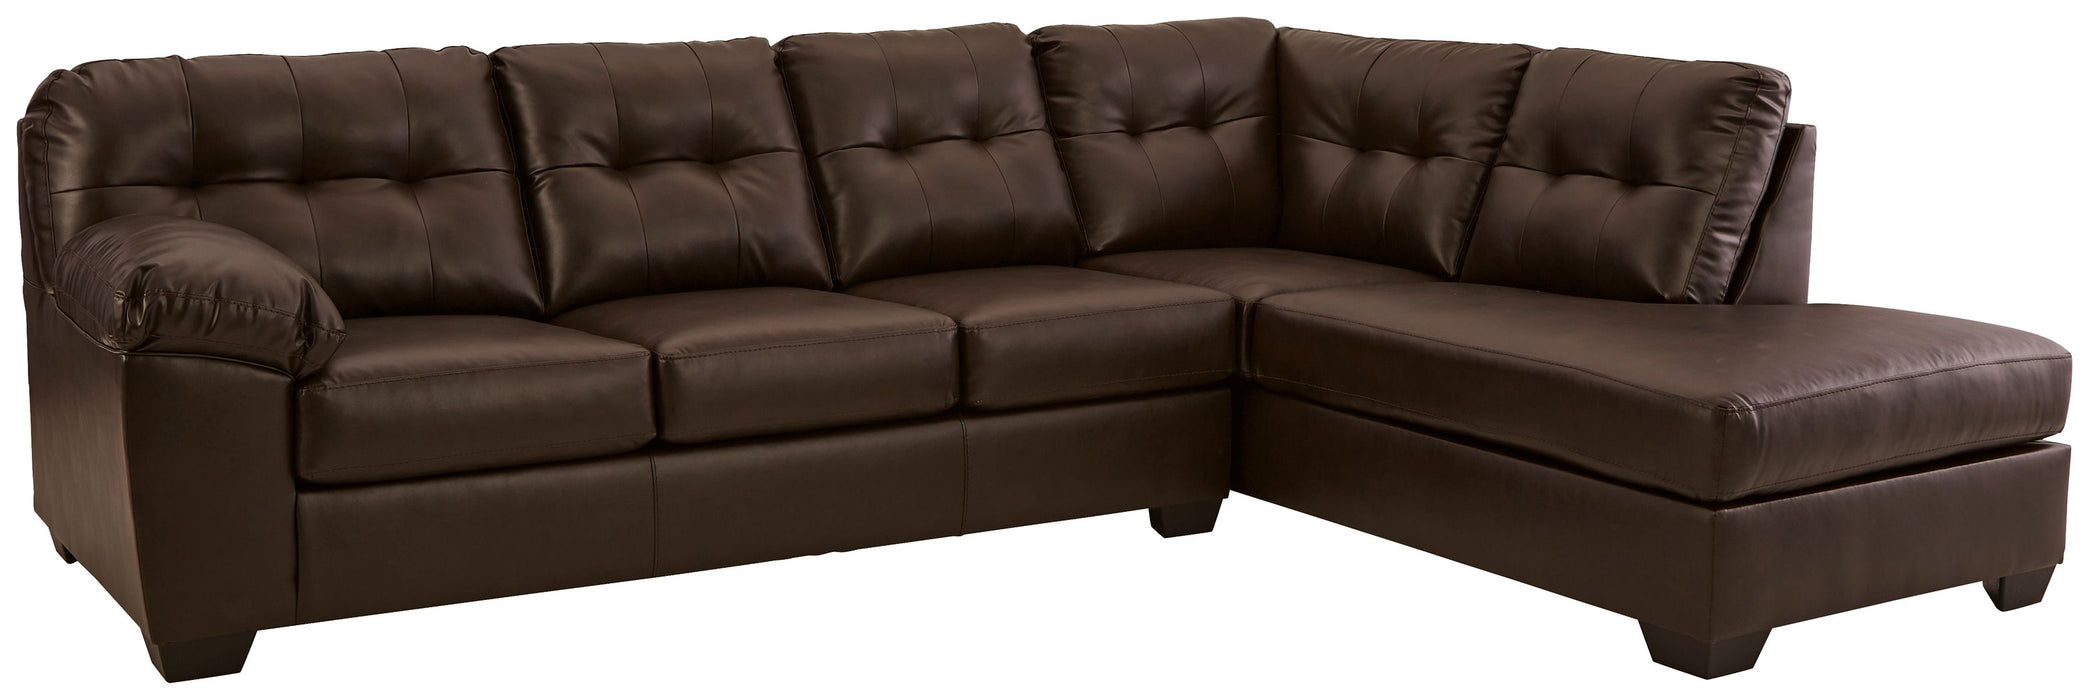 Donlen - Chocolate - Left Arm Facing Sofa 2 Pc Sectional